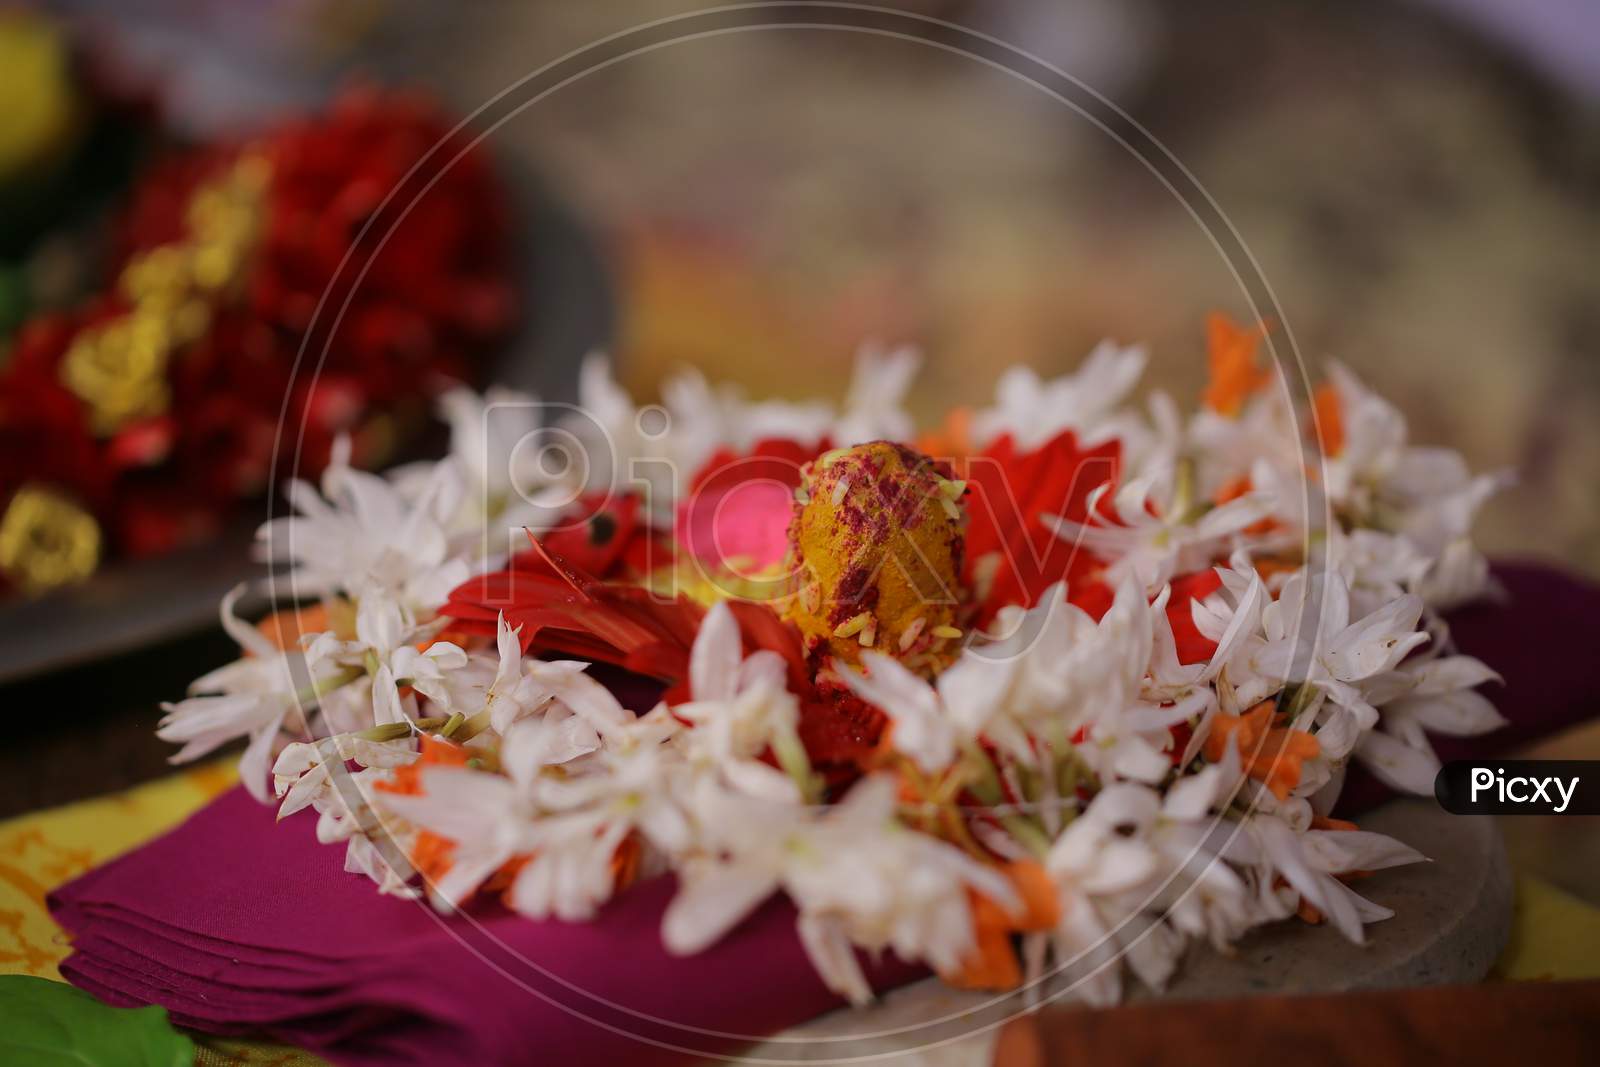 South Indian Hindu wedding Puja accessories